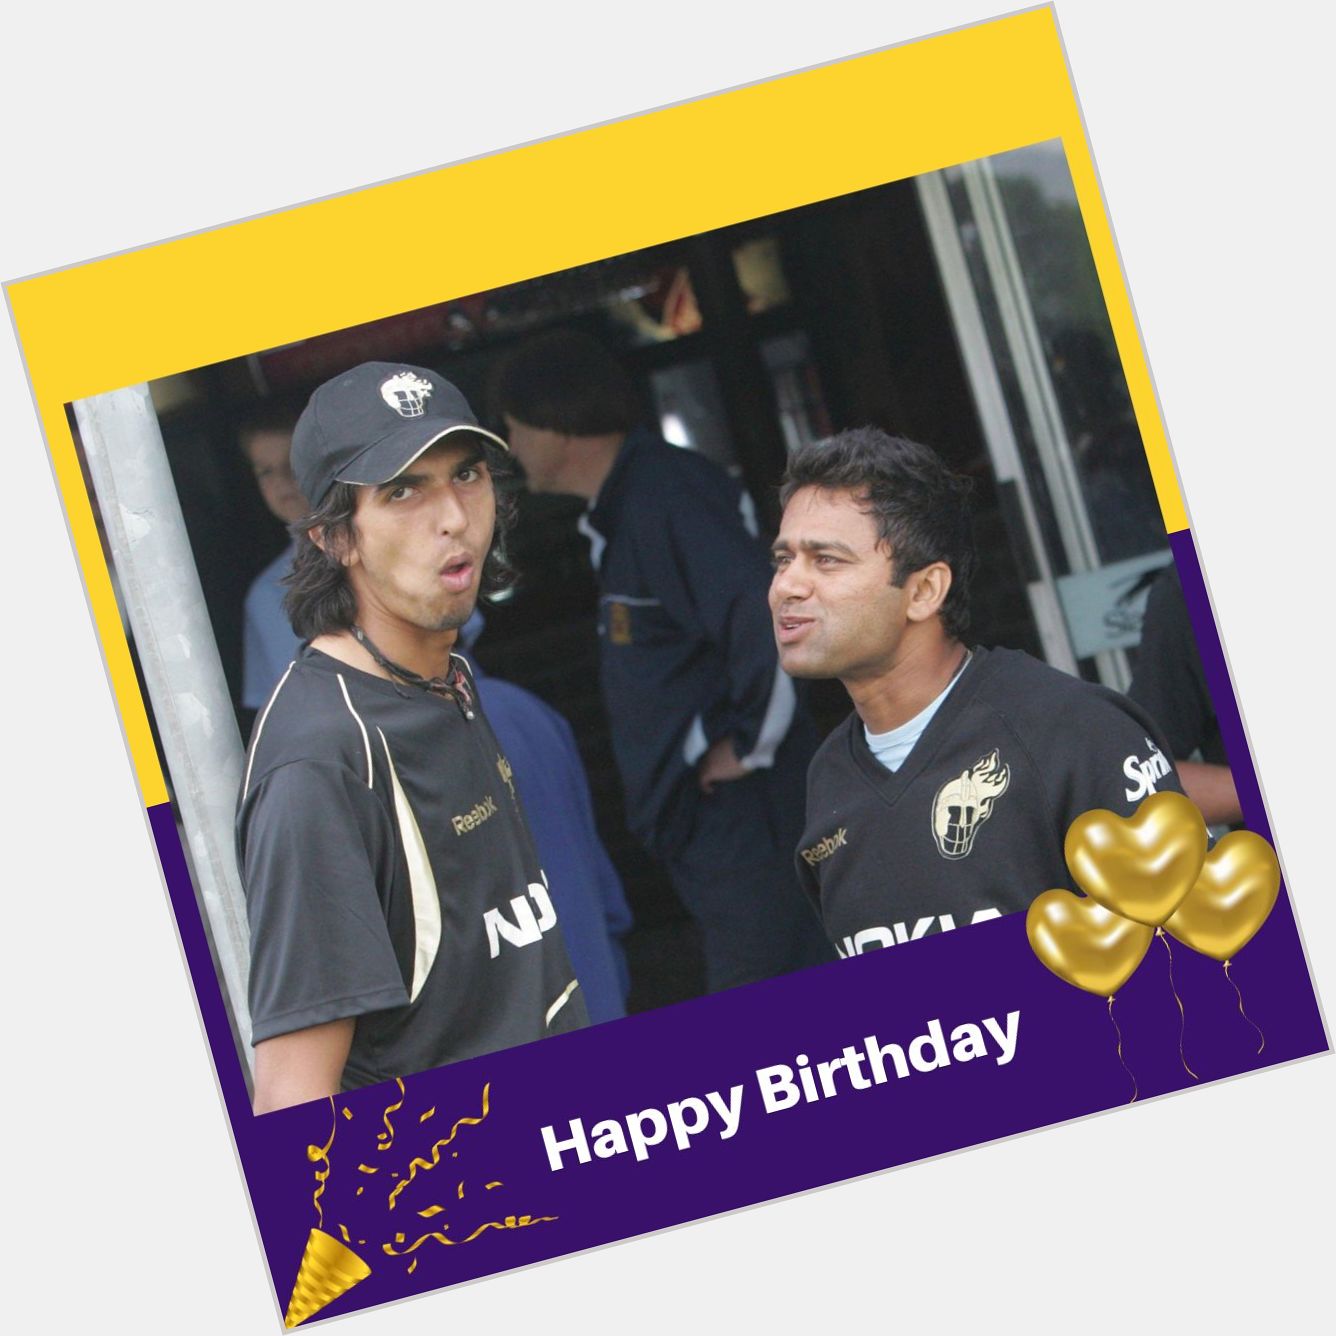 It\s               .

Wishing a very happy birthday to our former Knight Aakash Chopra. 